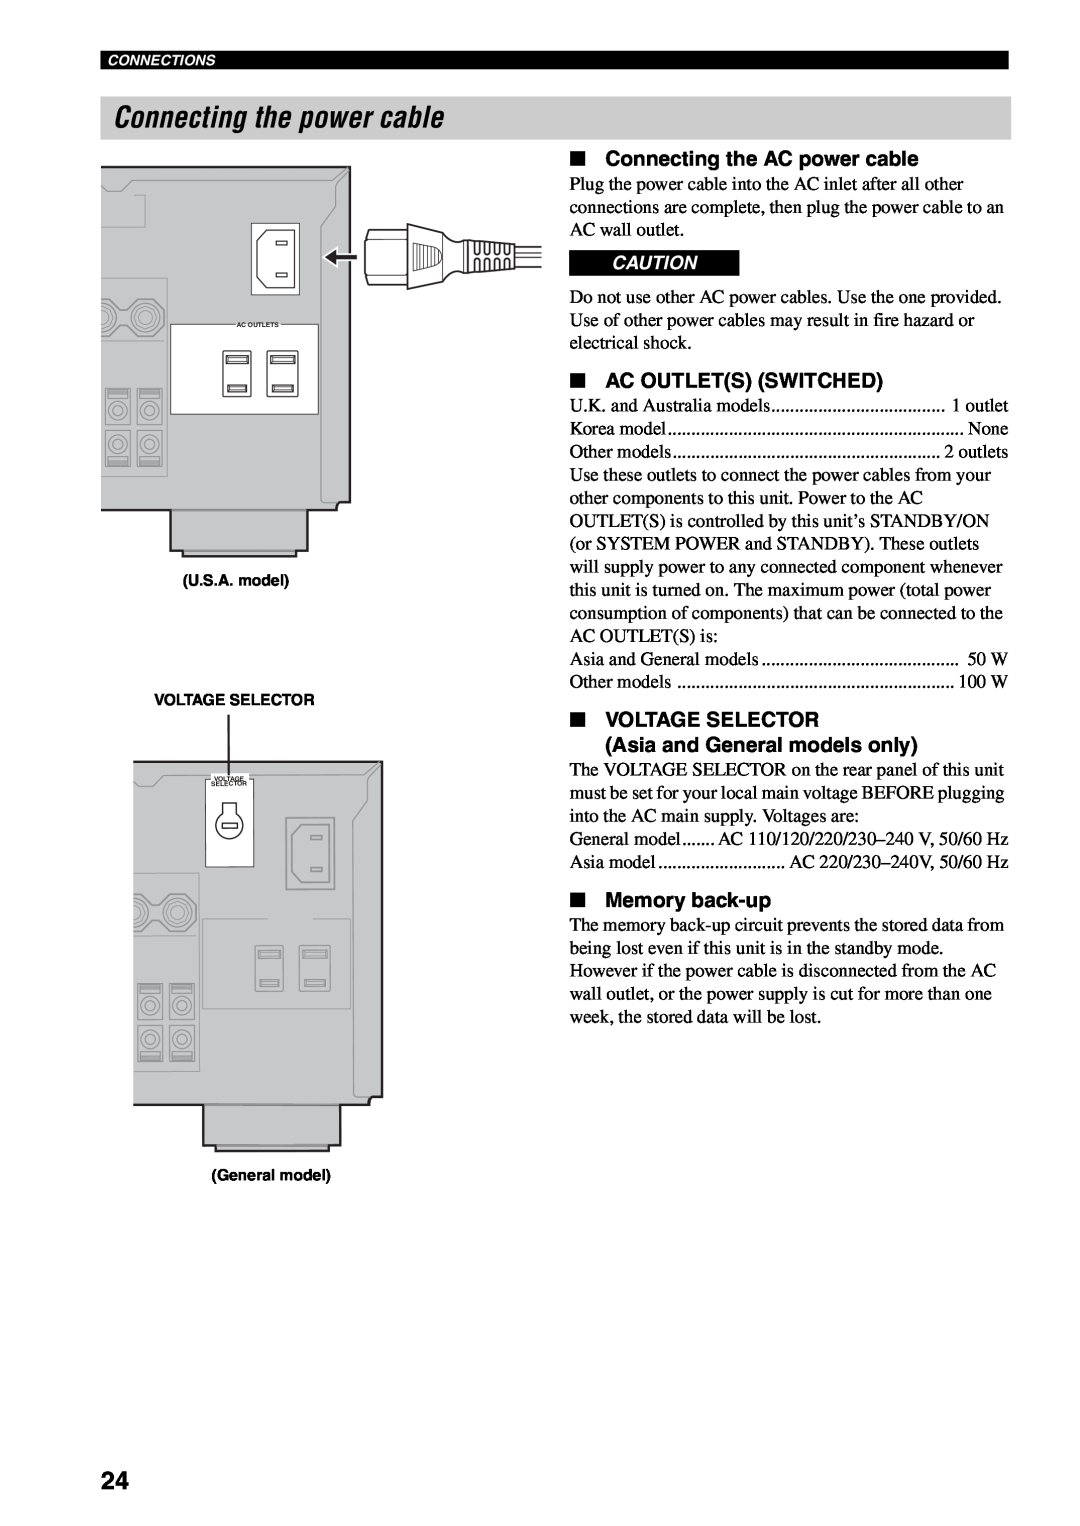 Yamaha RX-V2500 owner manual Connecting the power cable, Connecting the AC power cable, Ac Outlets Switched, Memory back-up 